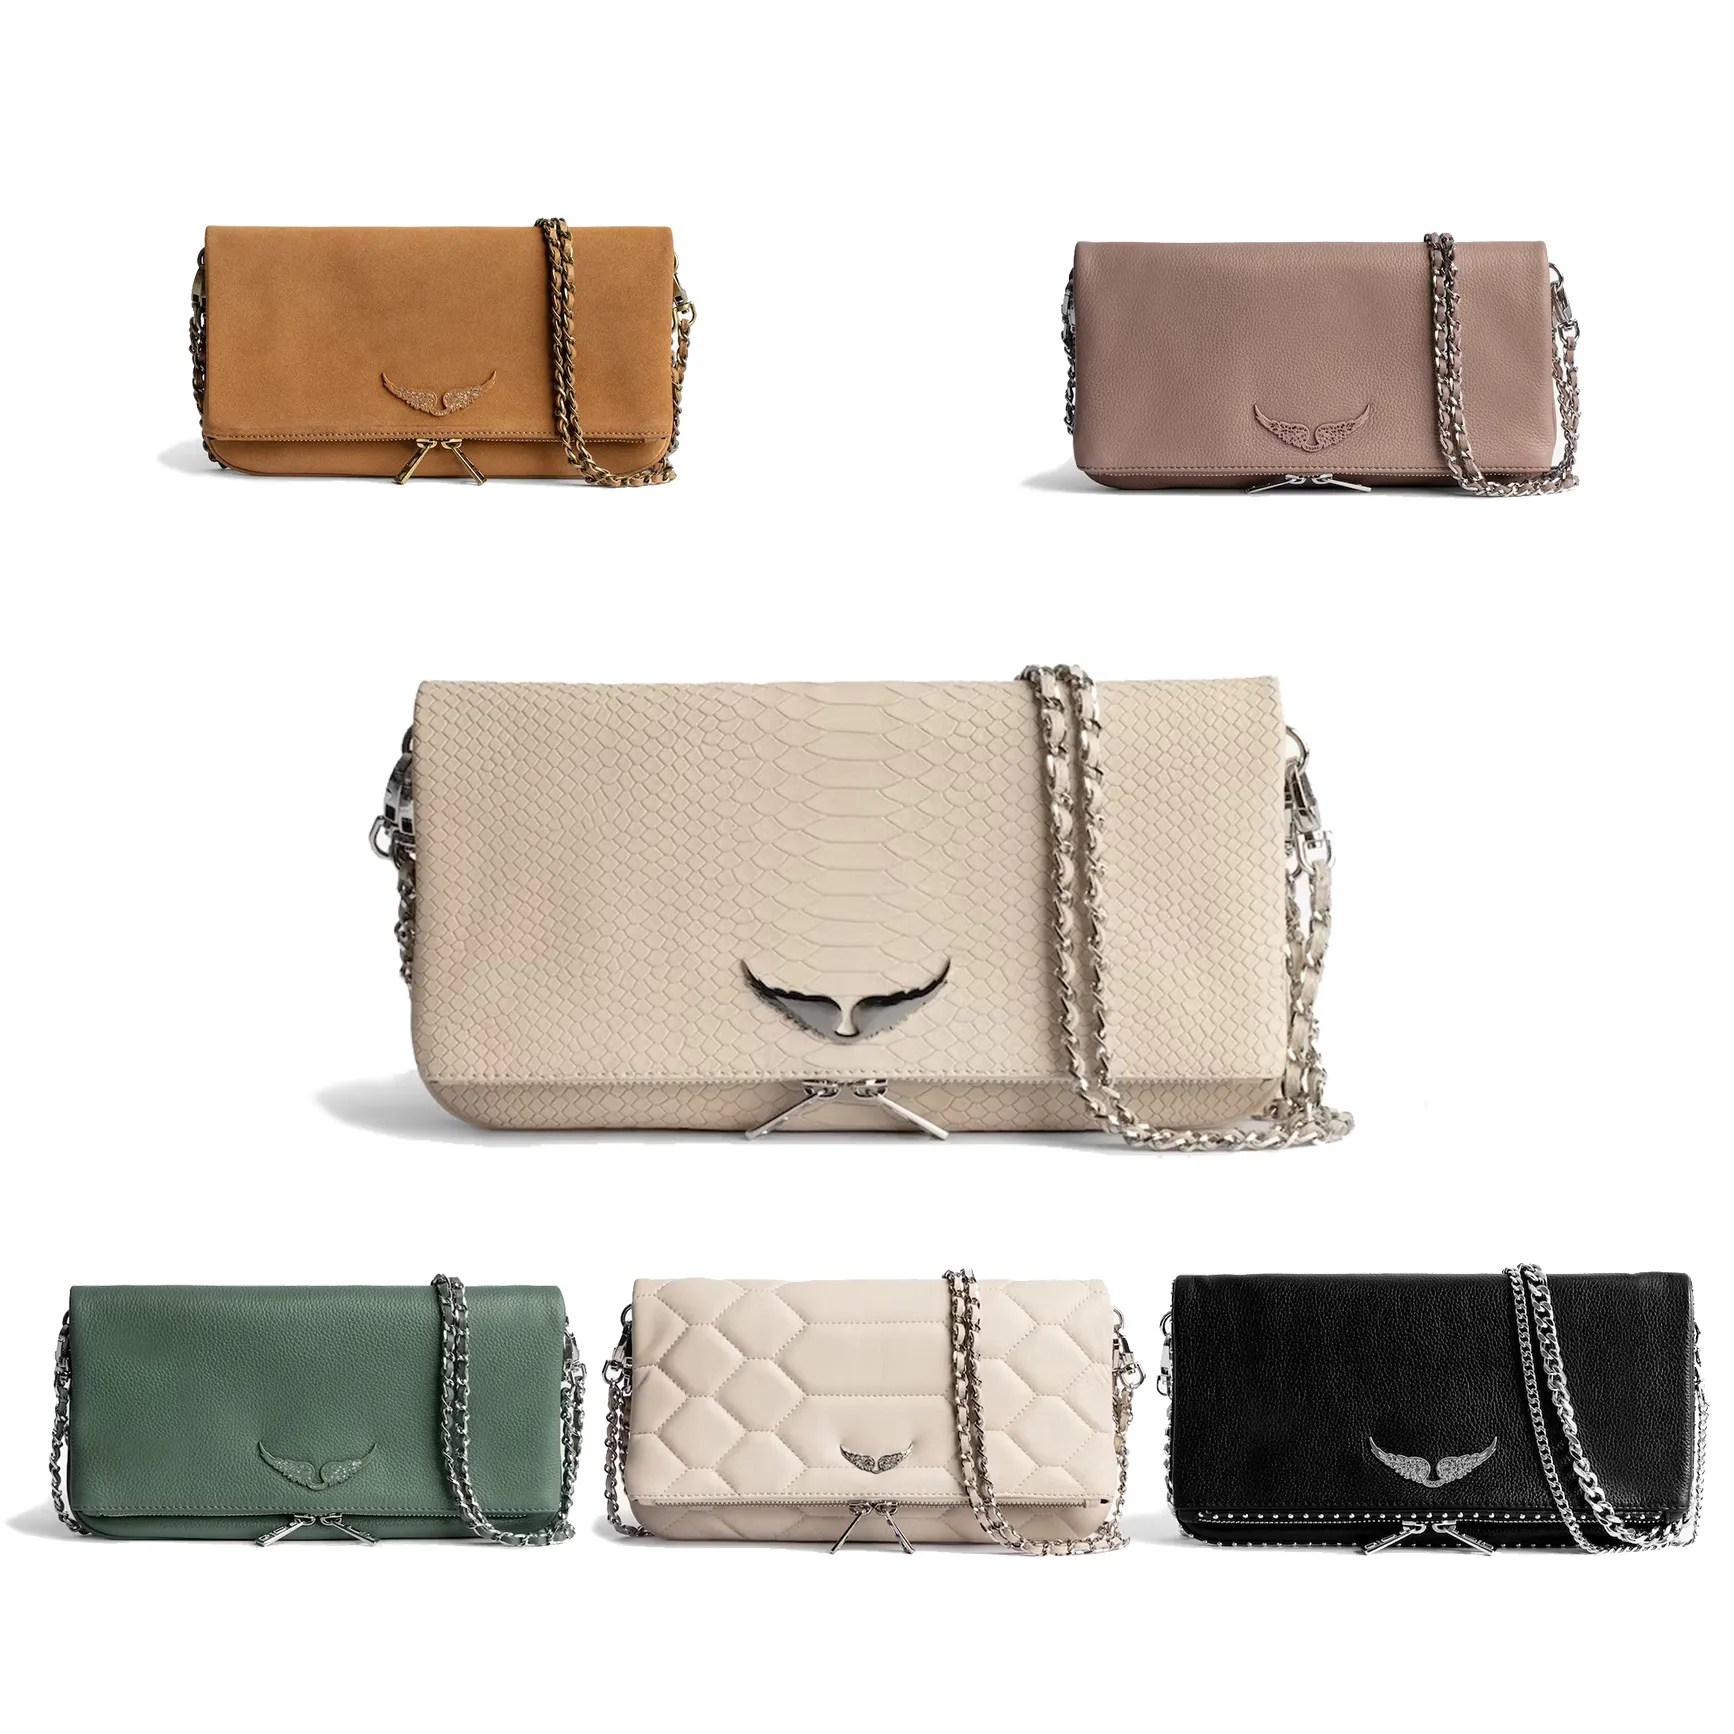 Zadig Voltaire Luxurys Pochette Rock Swing Sholdle Bag Your Wings Wings Winens Cross Body Mens Clutch Bagsデザイナーハンドバッグヴィンテージレザーウォレットスリングトートバッグ